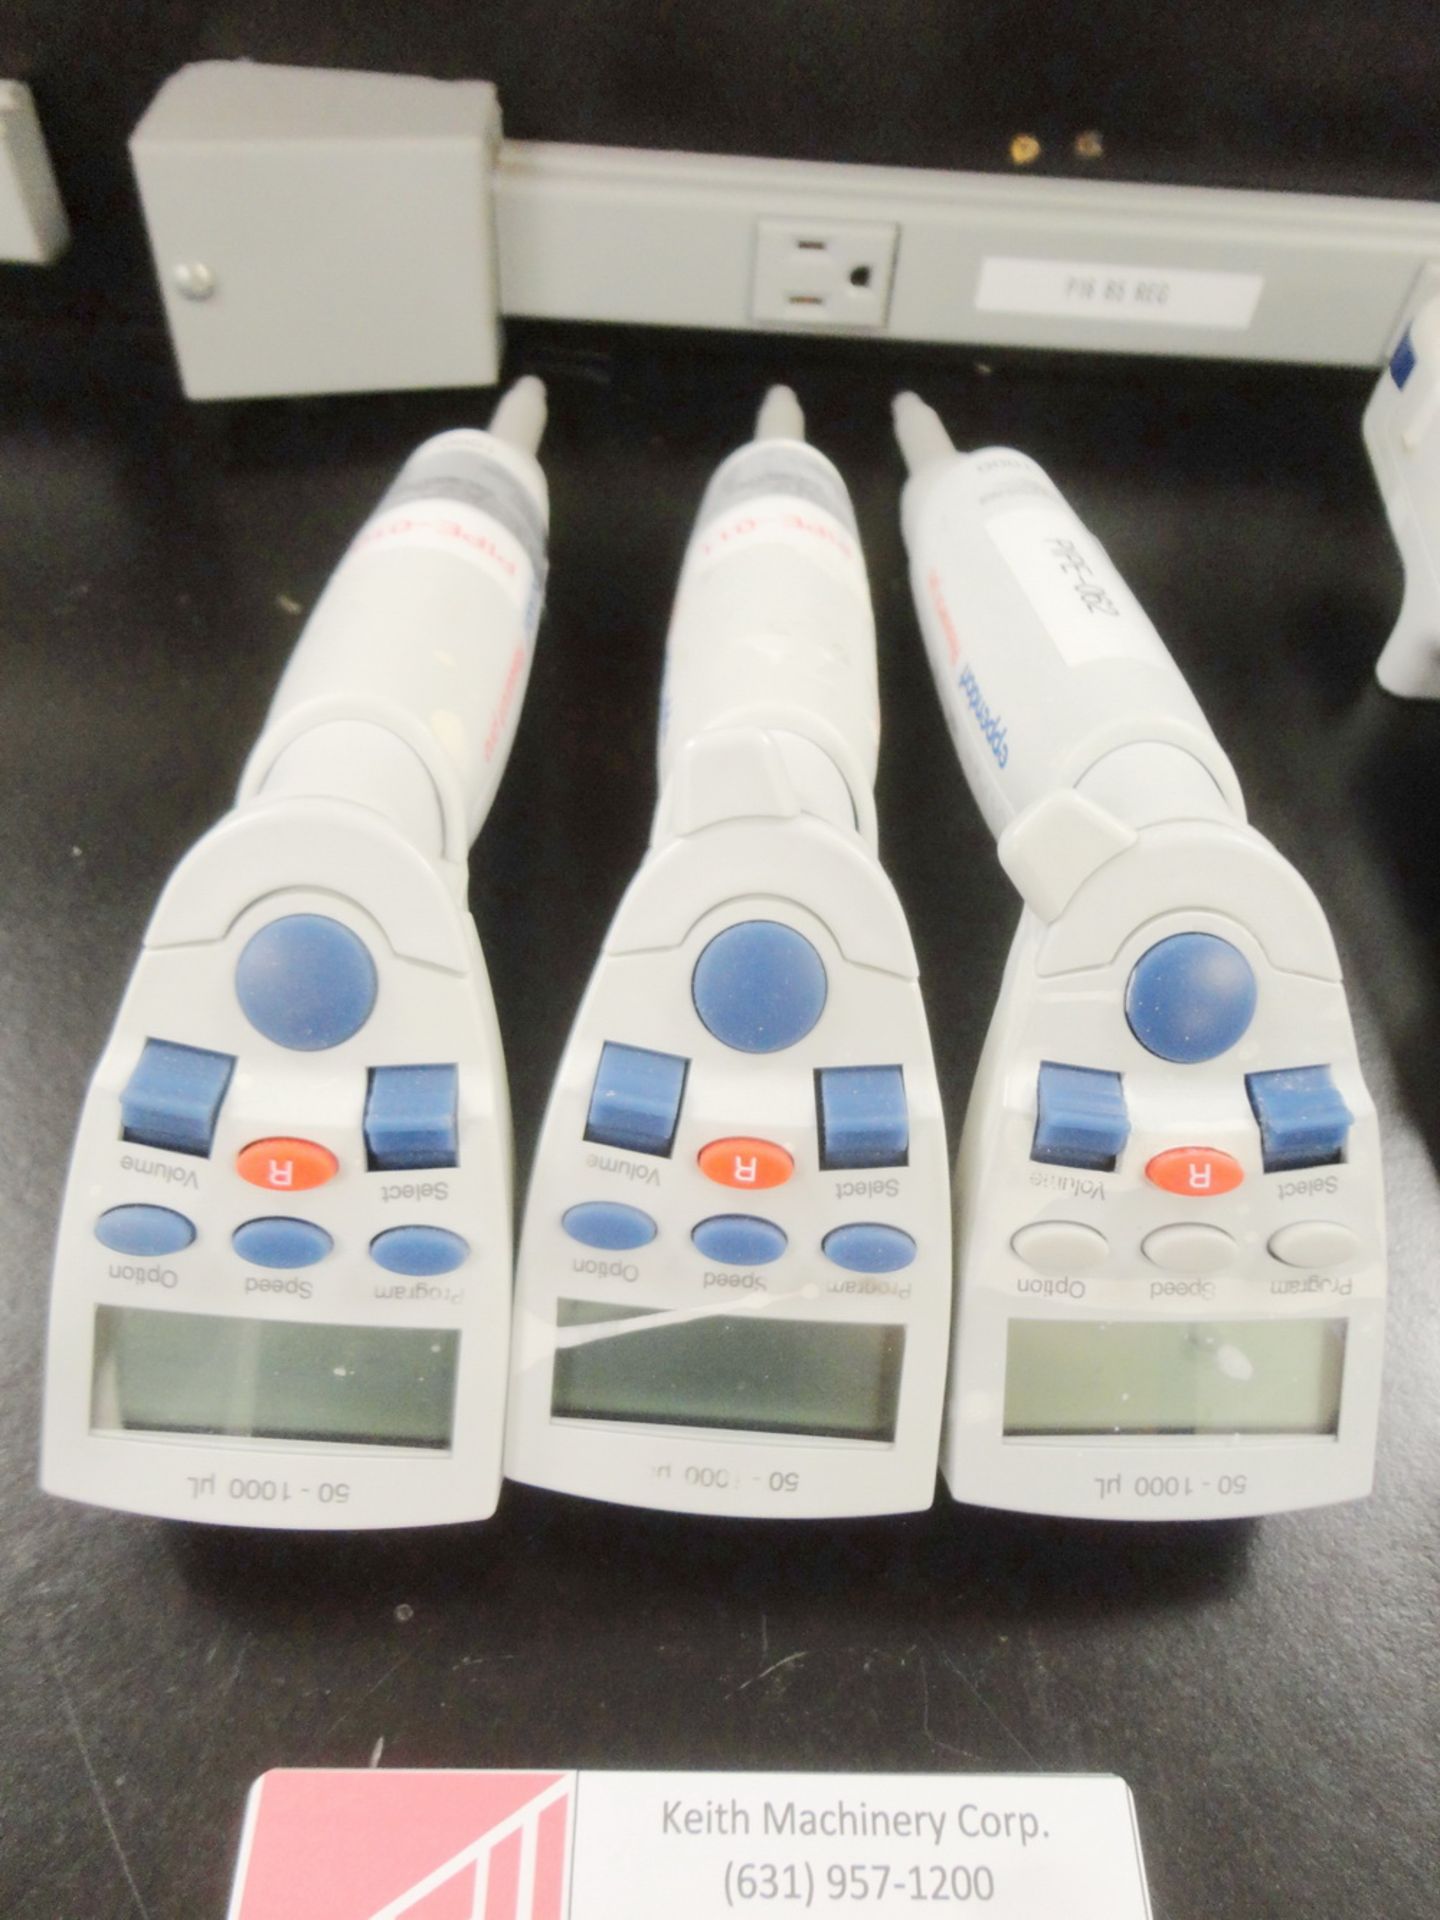 (3) Eppendorf battery powered pipettes, Model Research Pro, 50-1,000 ul